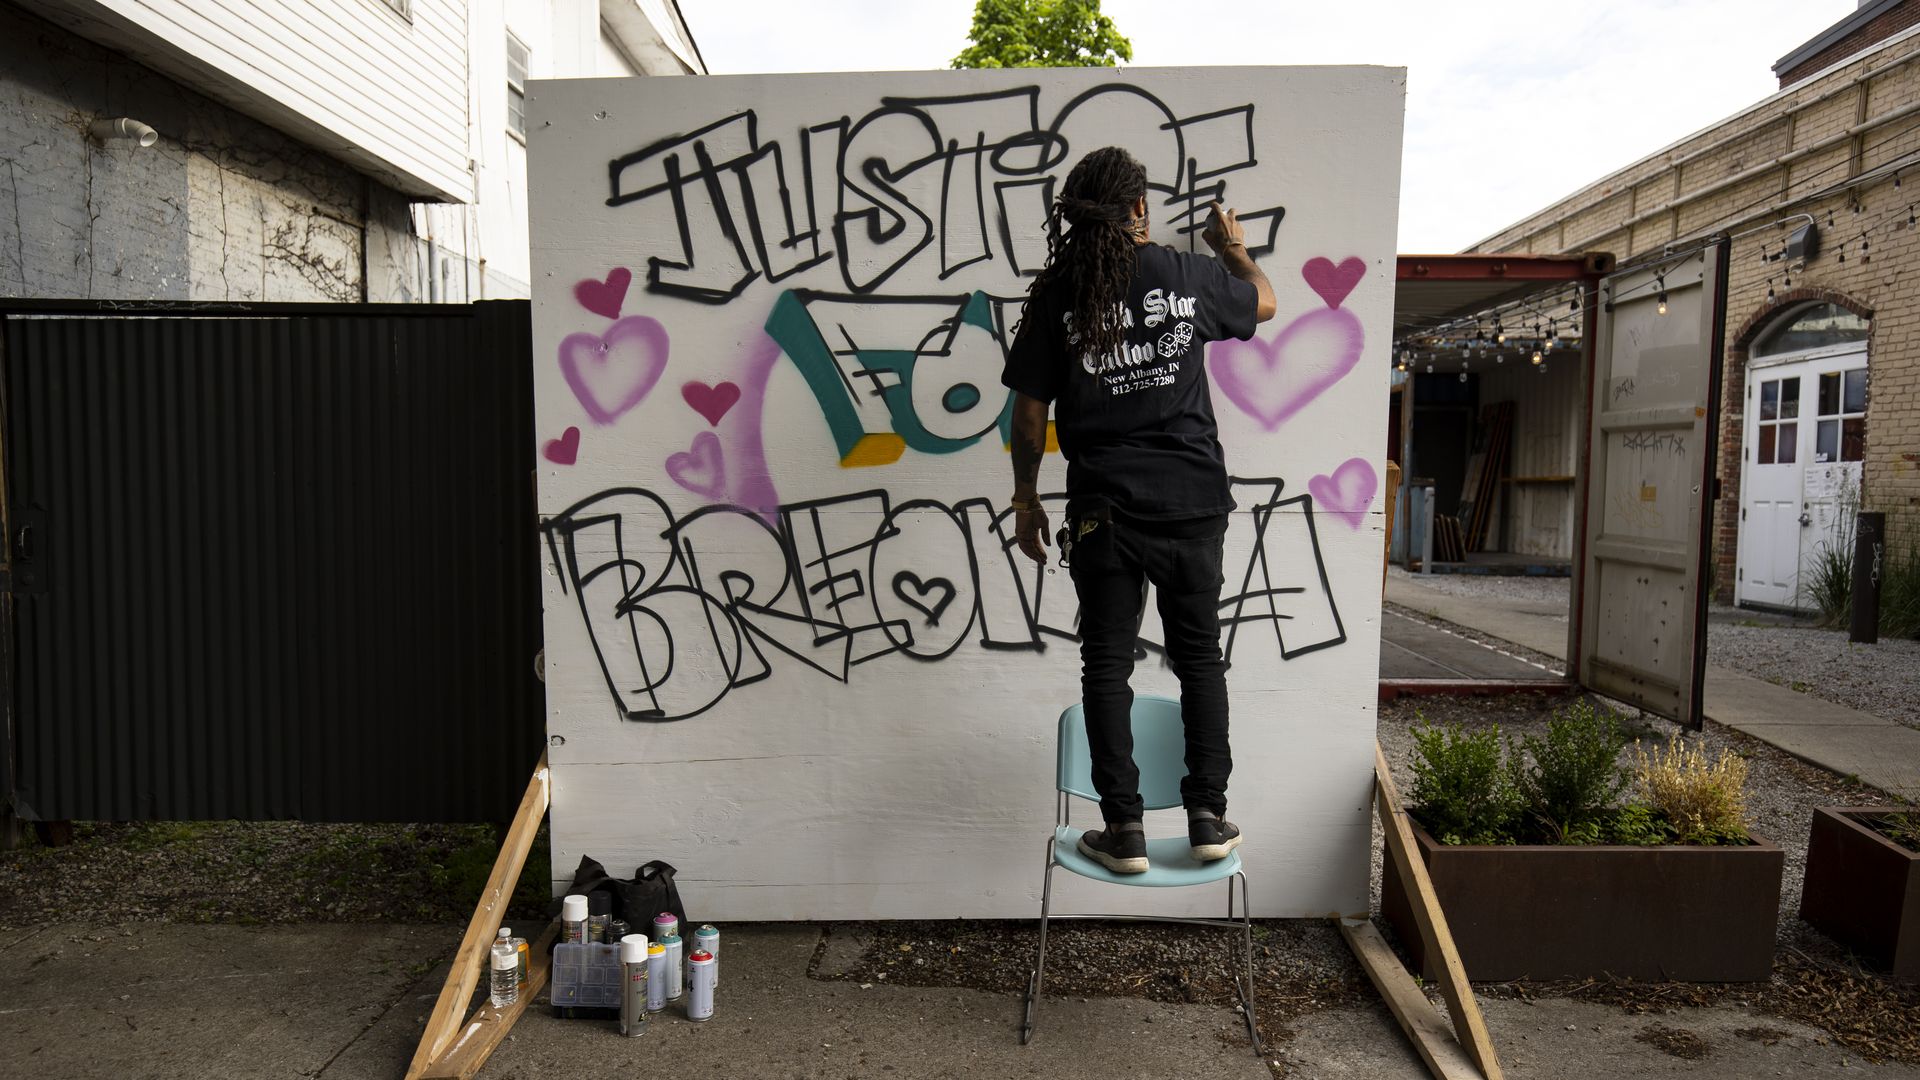 A man spray paints a sign that reads "Justice for Breonna" as Louisville remains in a state of protest